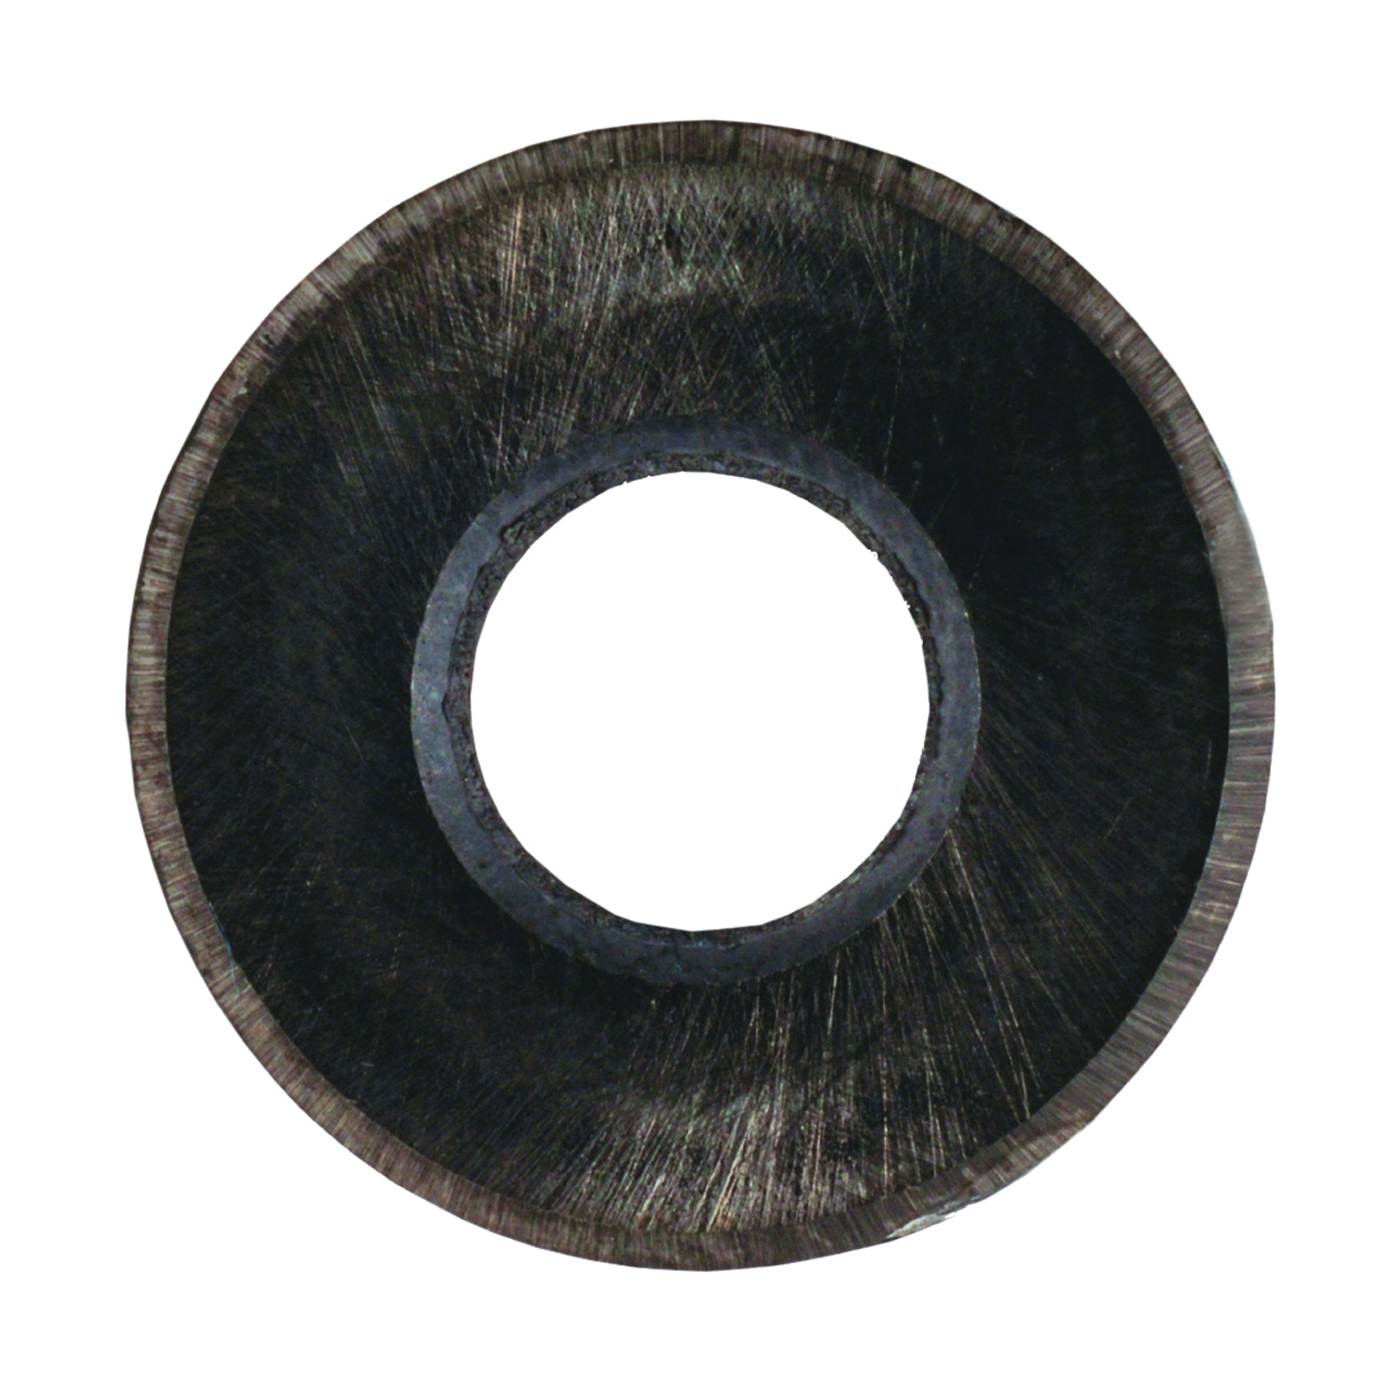 49969 Cutting Wheel with Cutters, 1/2 in W, Carbide, Titanium-Coated